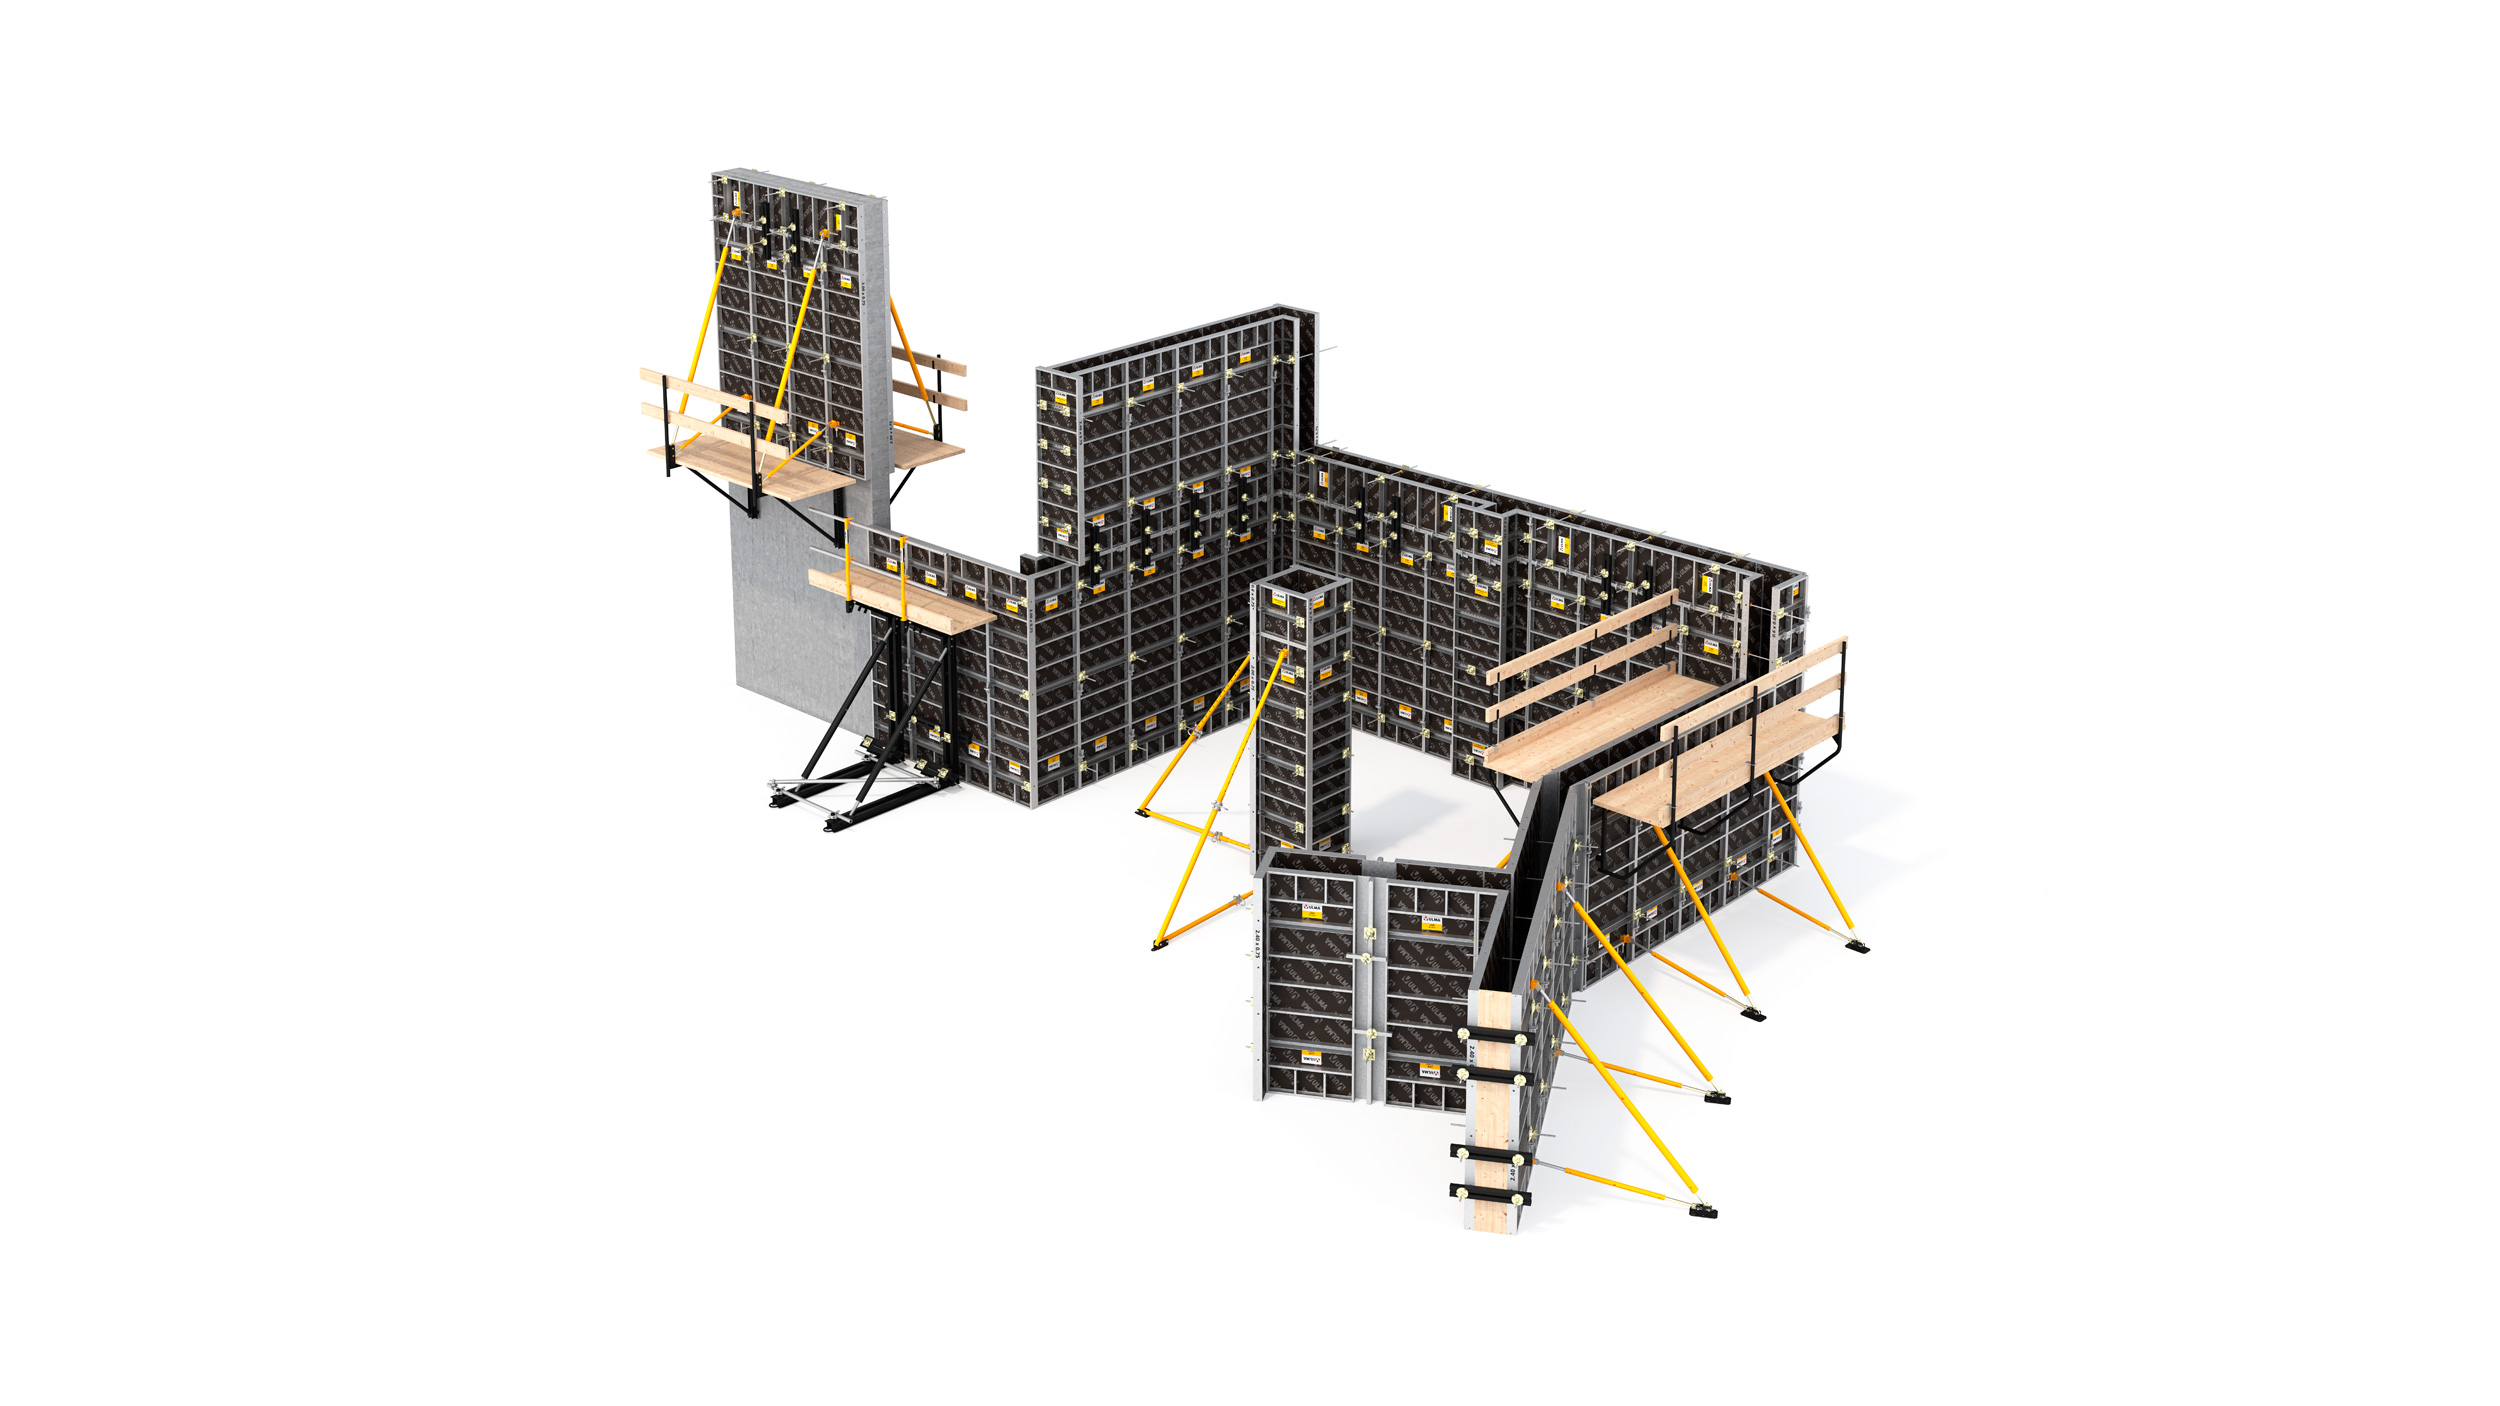 Light yet sturdy wall and column formwork with a wide range of multifunctional panels. Perfect for complex geometrical structures. Manual handling or gang forming.